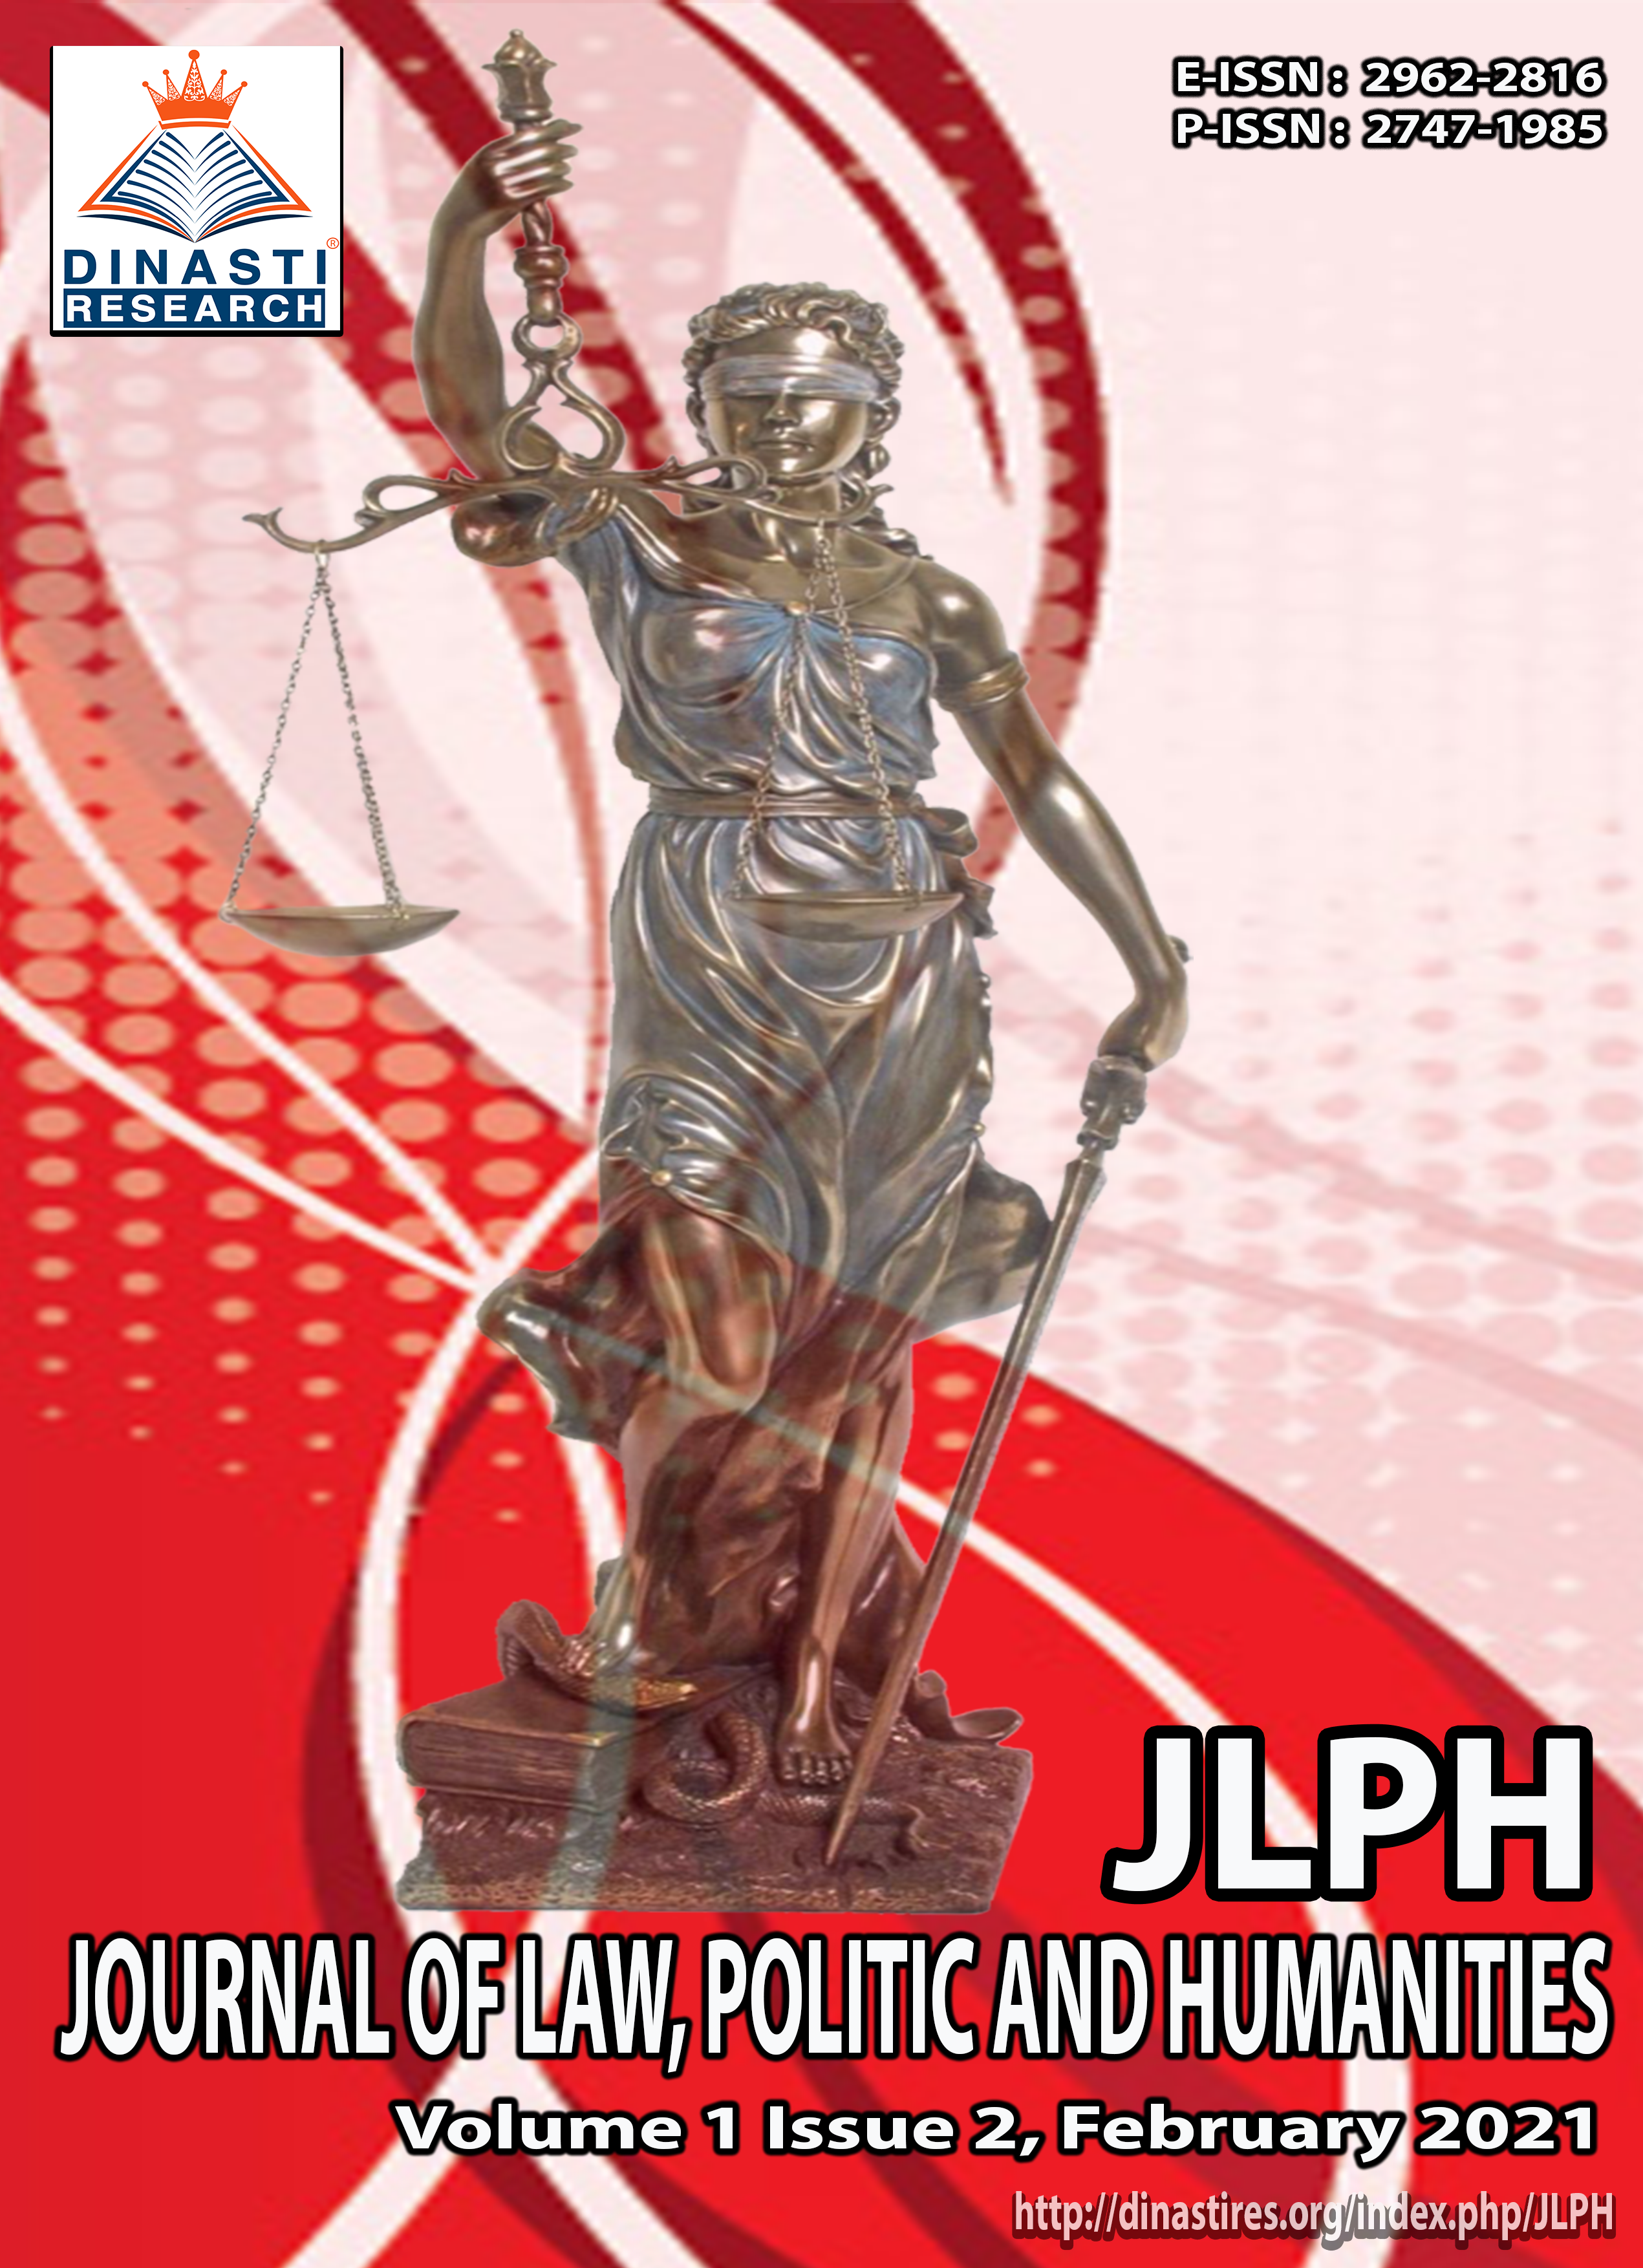 					View Vol. 1 No. 2 (2021): (JLPH) Journal of Law, Politic and Humanities (February 2021)
				